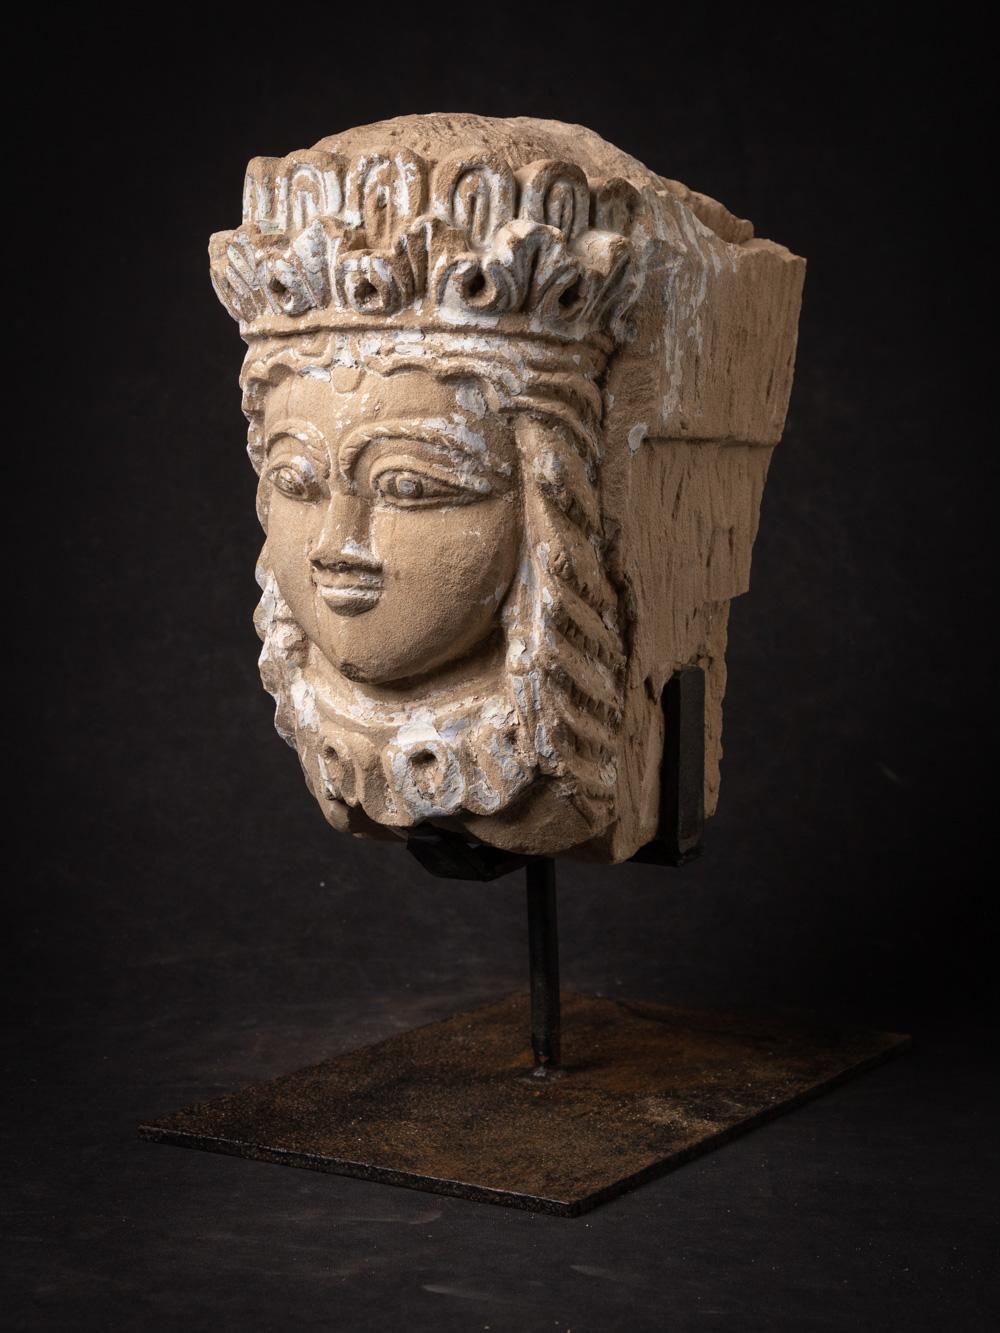 The antique sandstone head from India is a remarkable and historically significant artifact with deep cultural and artistic roots. Crafted from sandstone, this head stands at 42 cm in height, with measurements of 20.5 cm in width and 32 cm in depth,